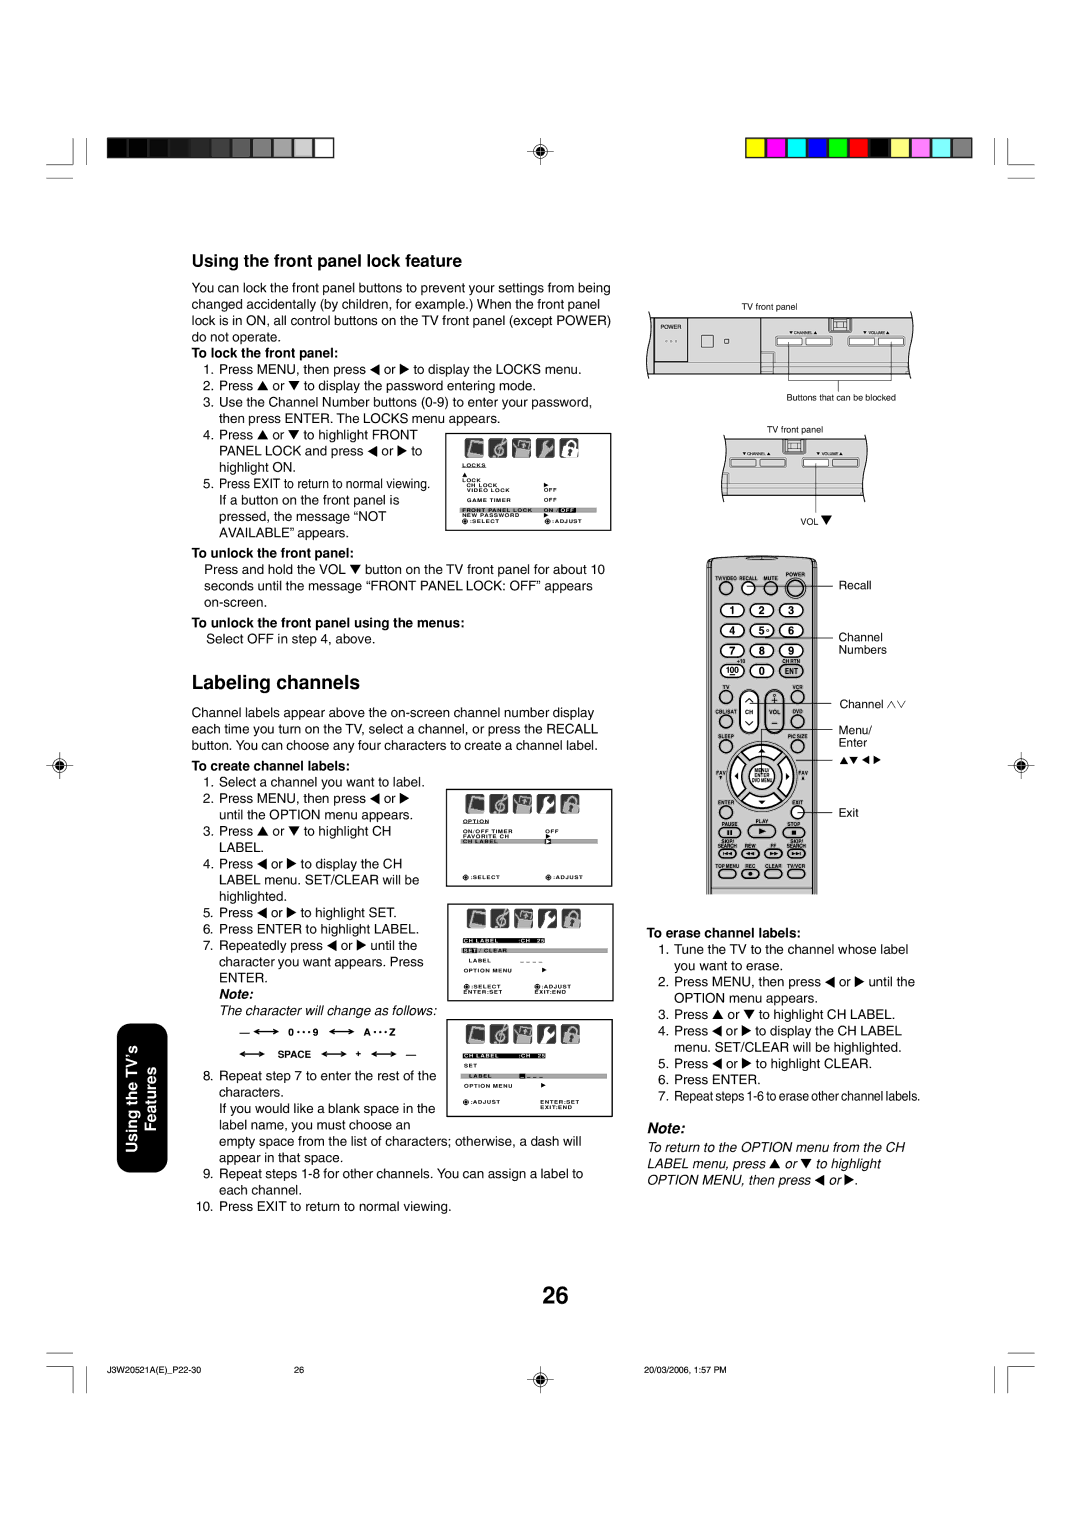 Toshiba 27DF46 appendix Labeling channels, Using the front panel lock feature 